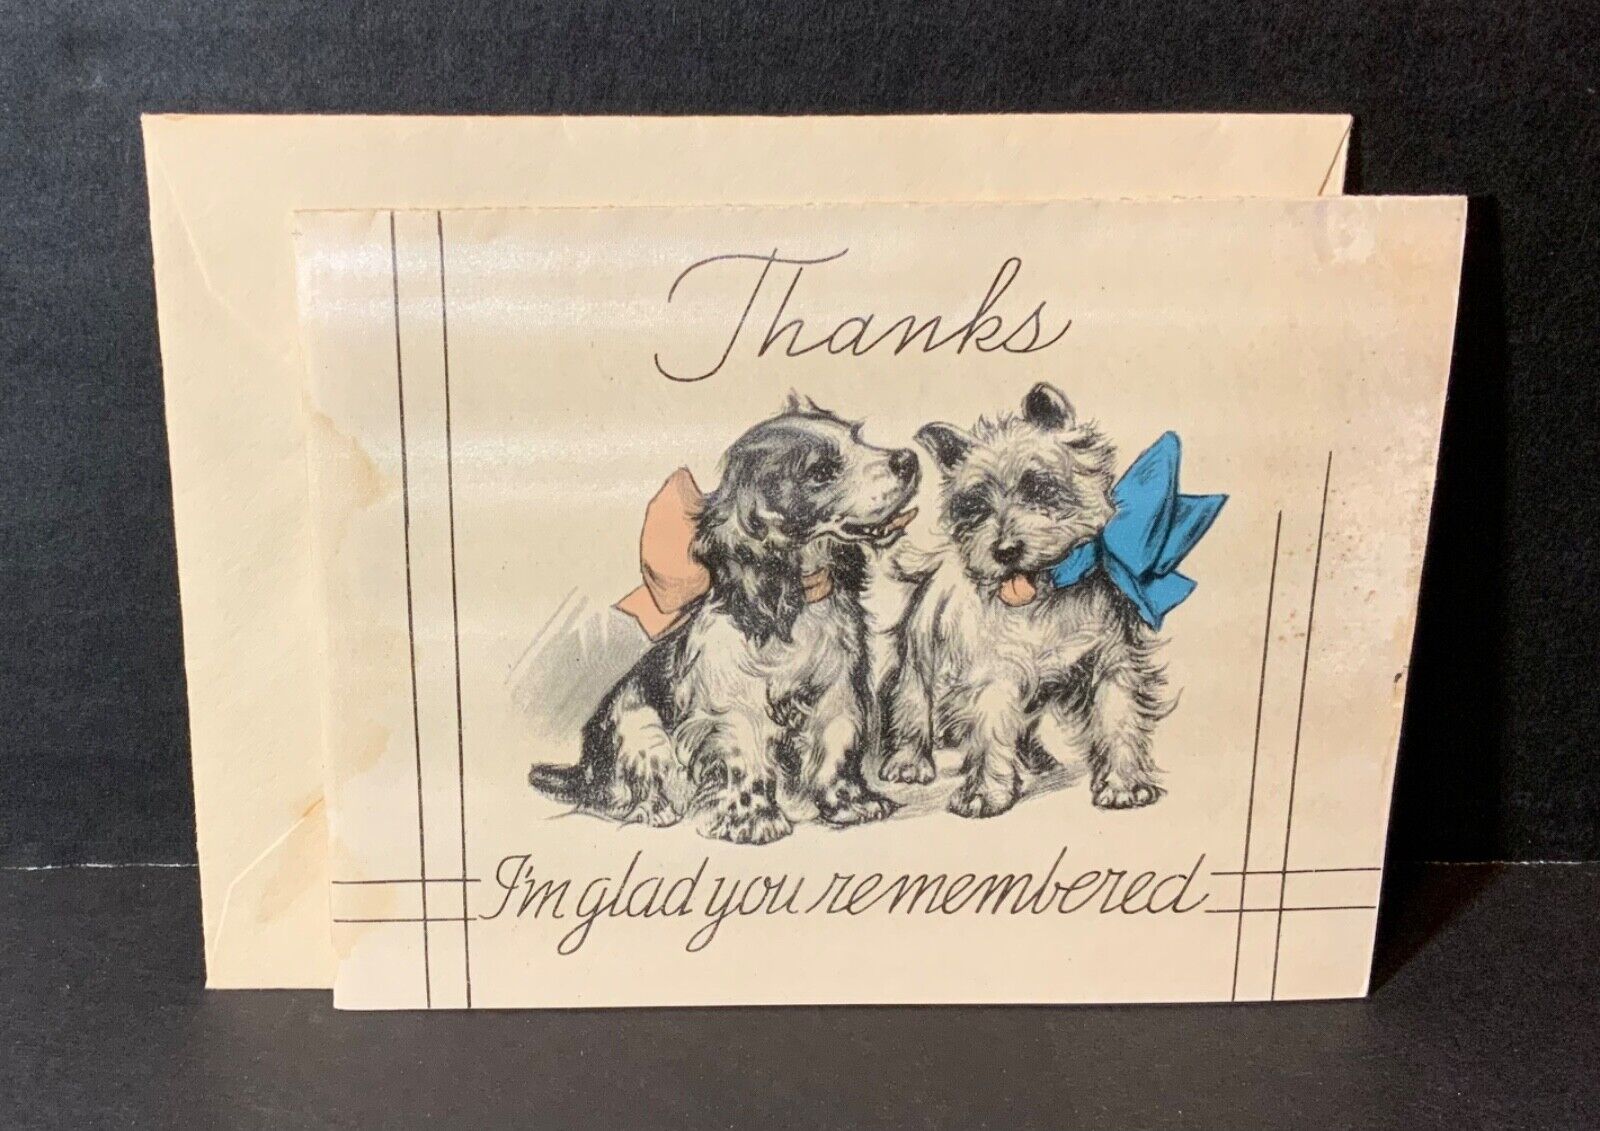 VTG 1936 Card Tunes Thank You Card UNUSED Art Deco 2 Puppy Dogs Full Sheet Music